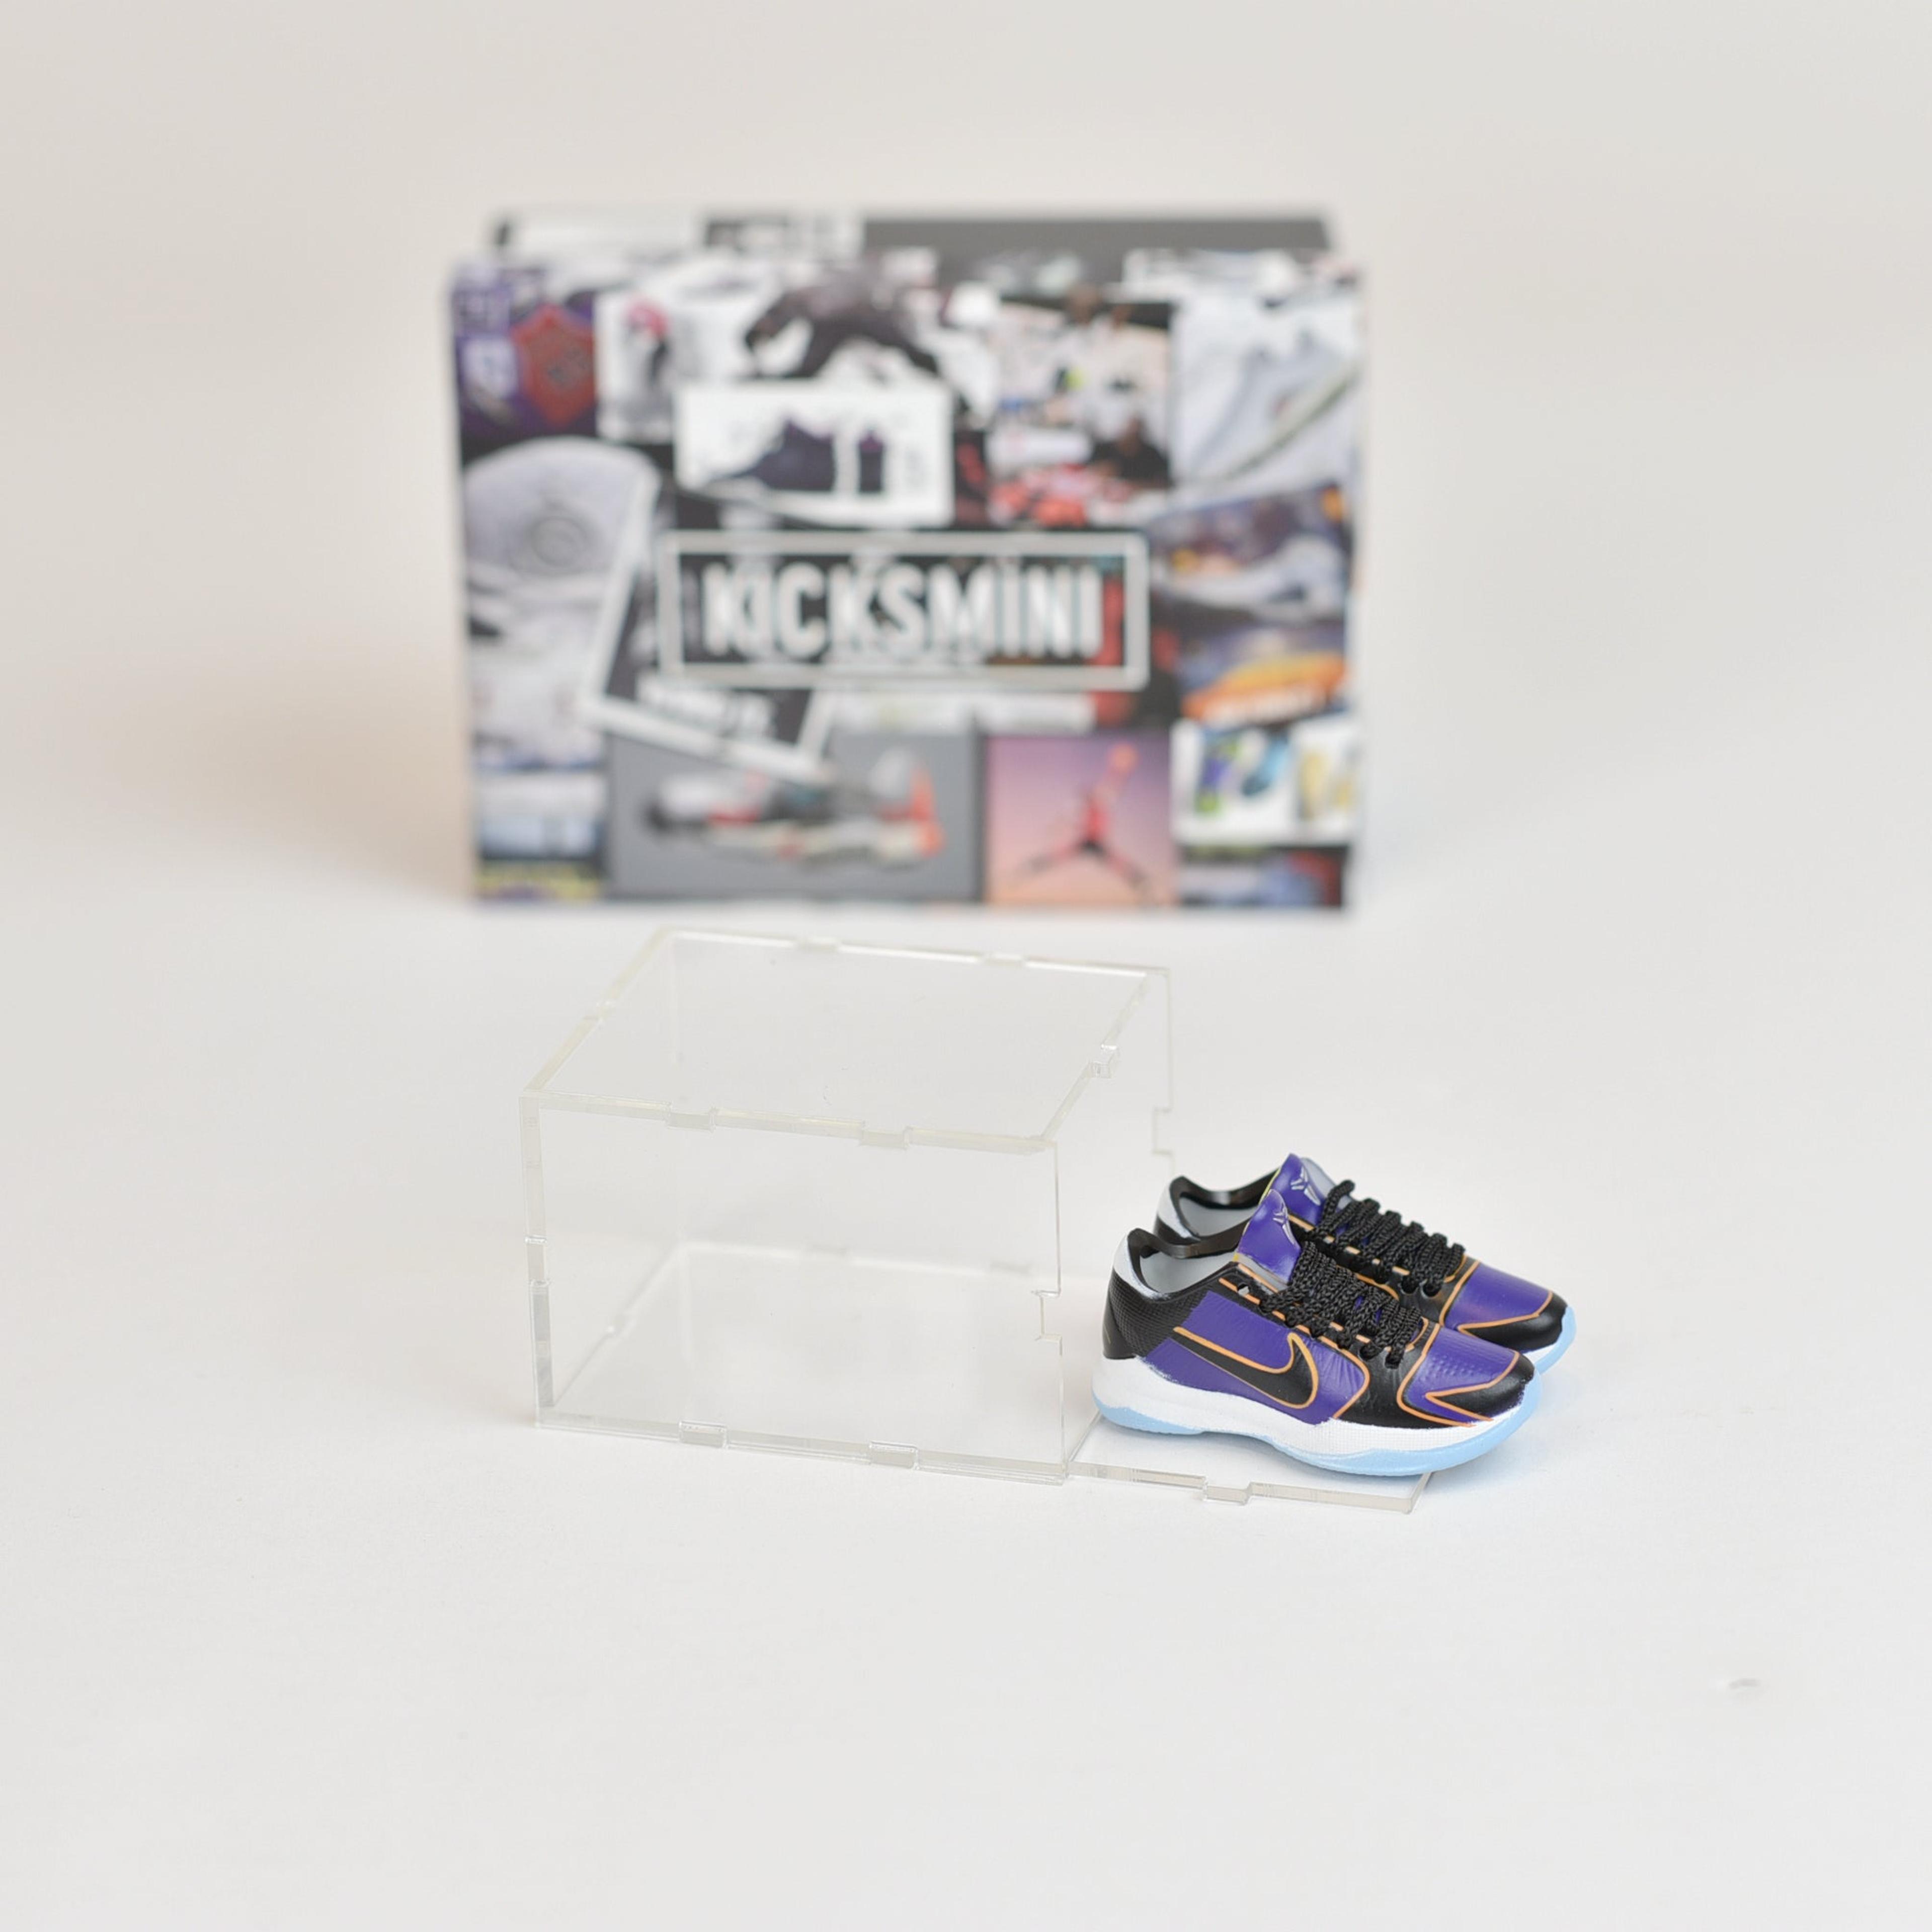 Alternate View 27 of Kobe Bryant/LeBron James/Steph Curry Mini Sneaker Collection wit